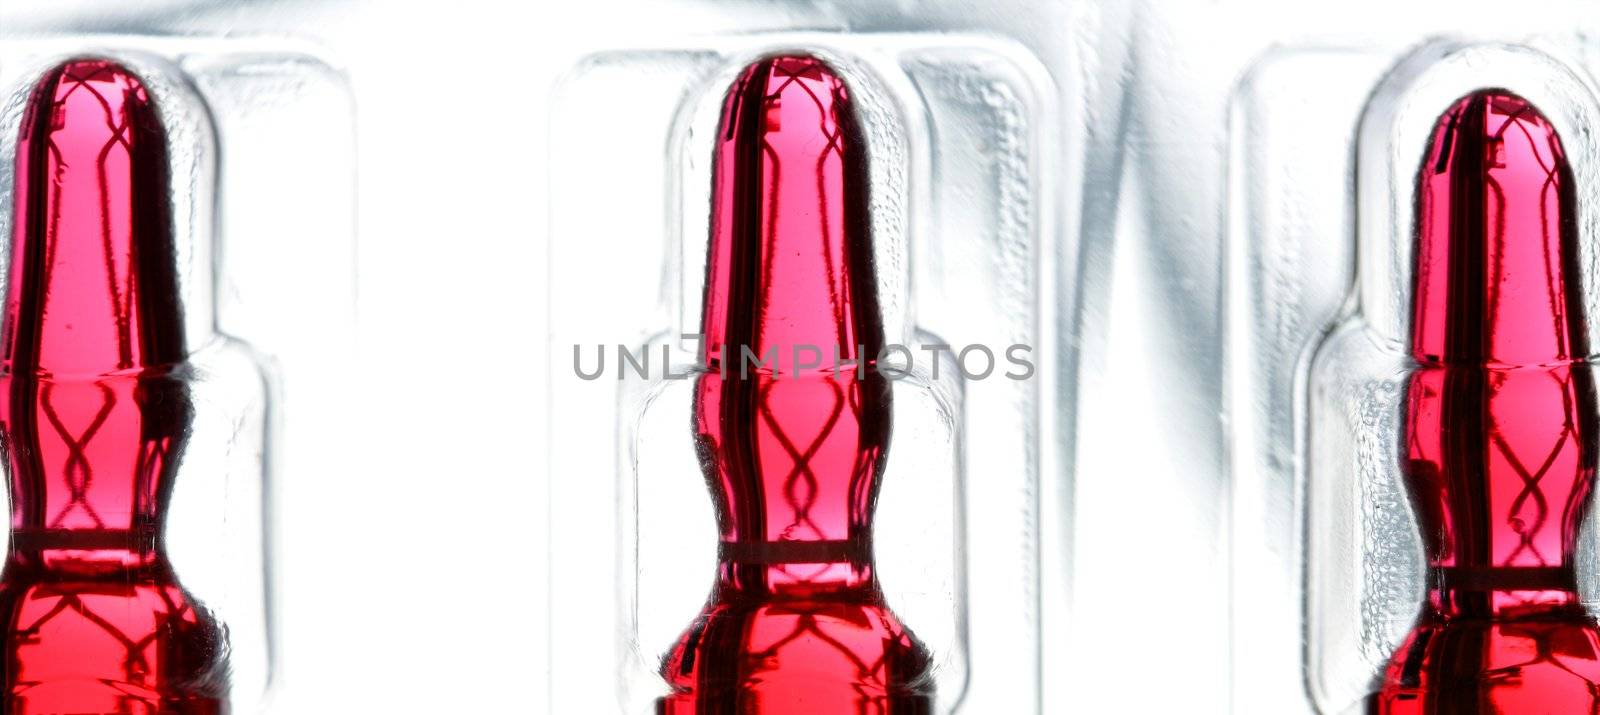 Glass ampoule with red liquid medicine by lunamarina